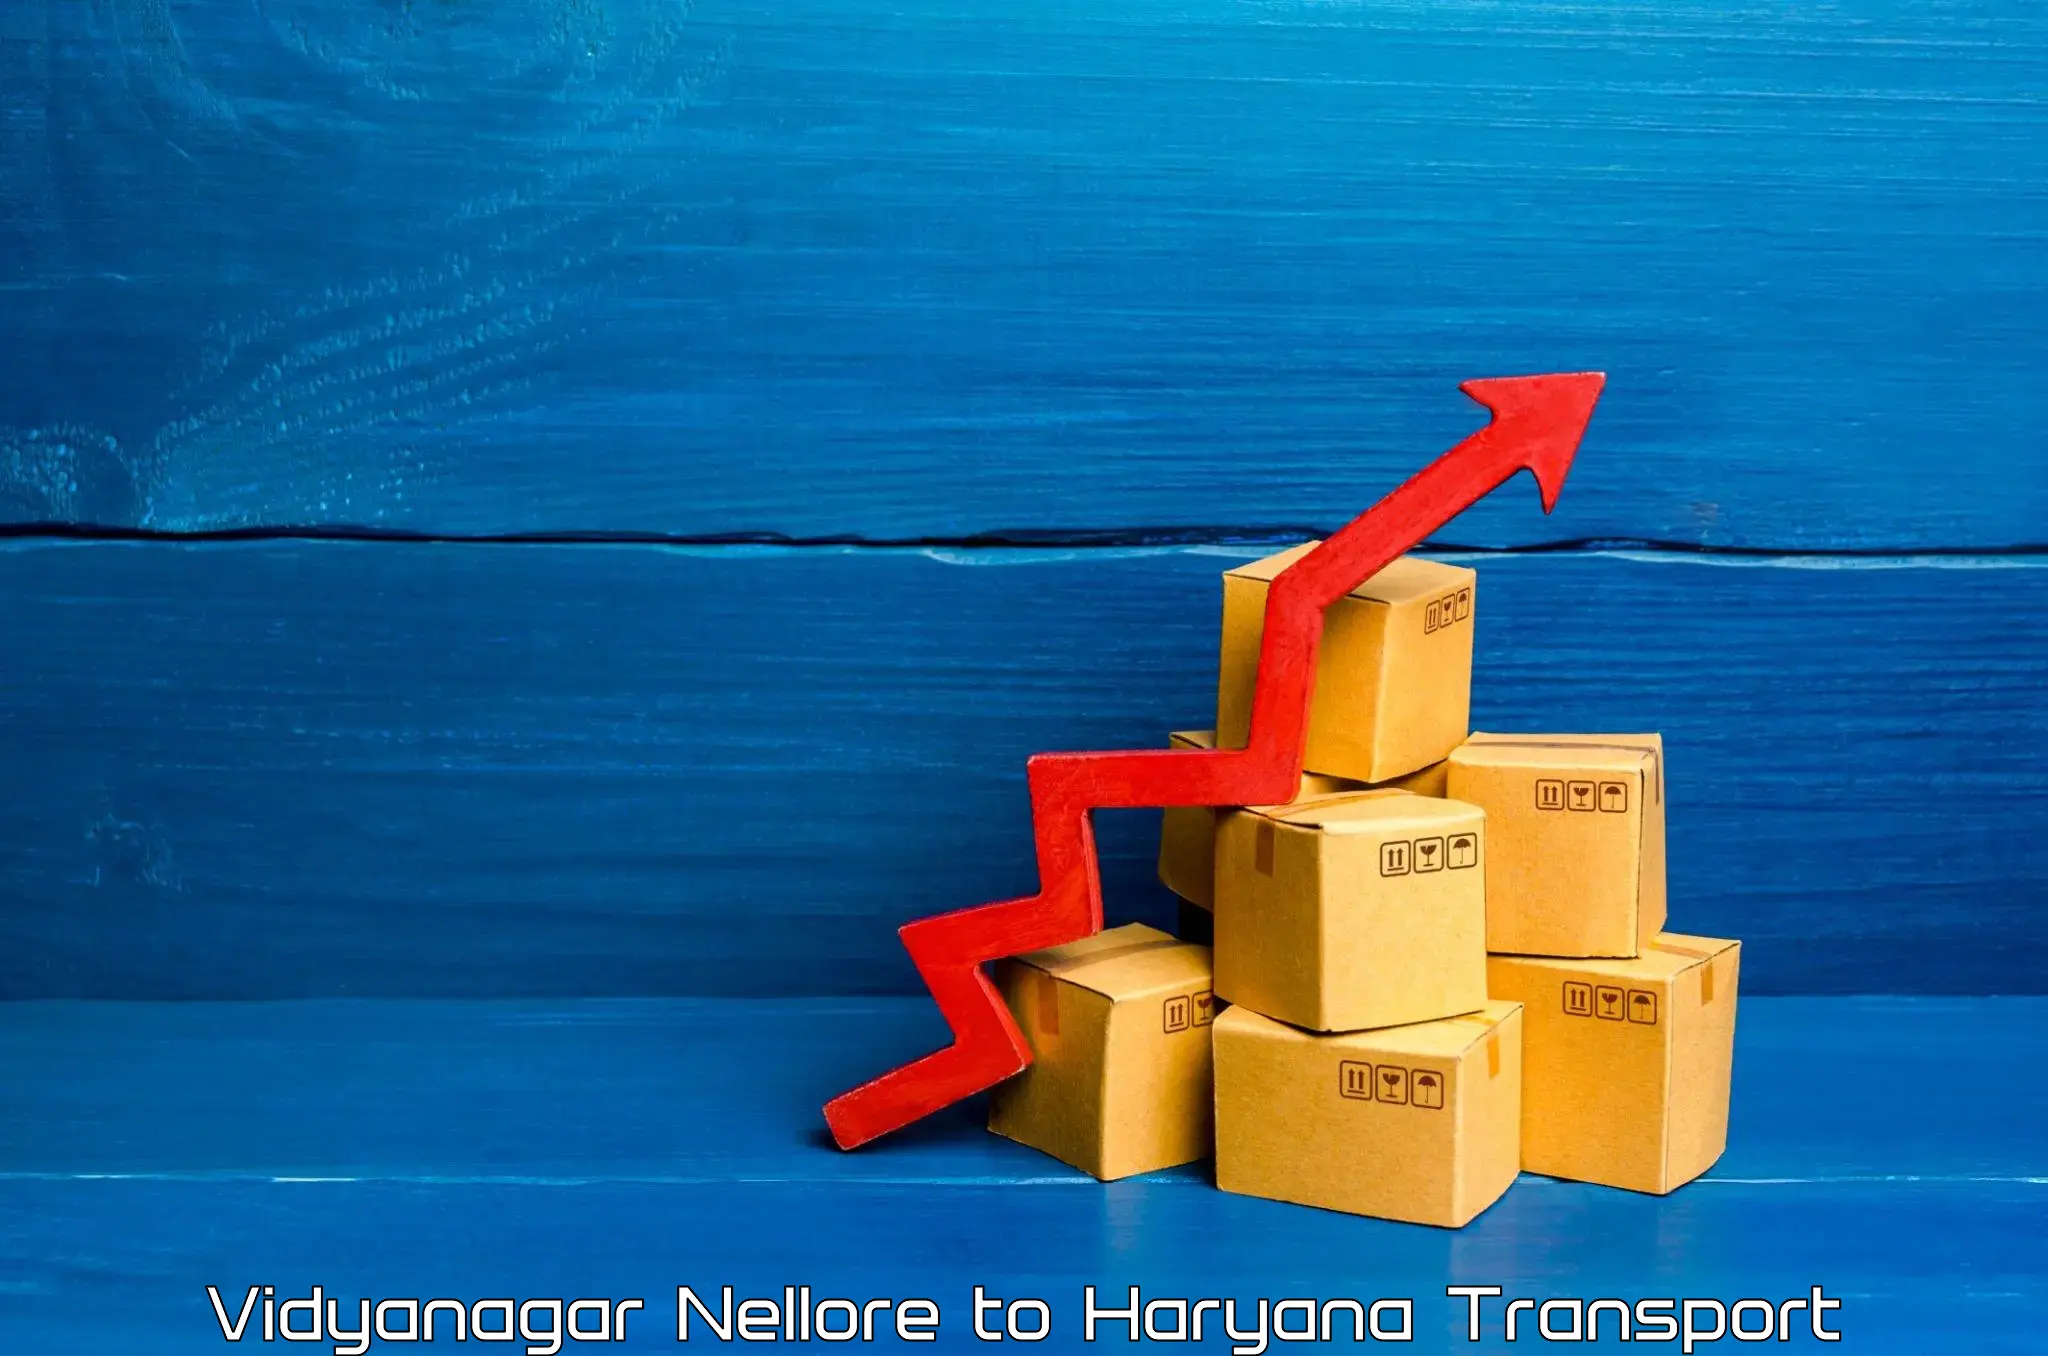 Package delivery services Vidyanagar Nellore to NCR Haryana